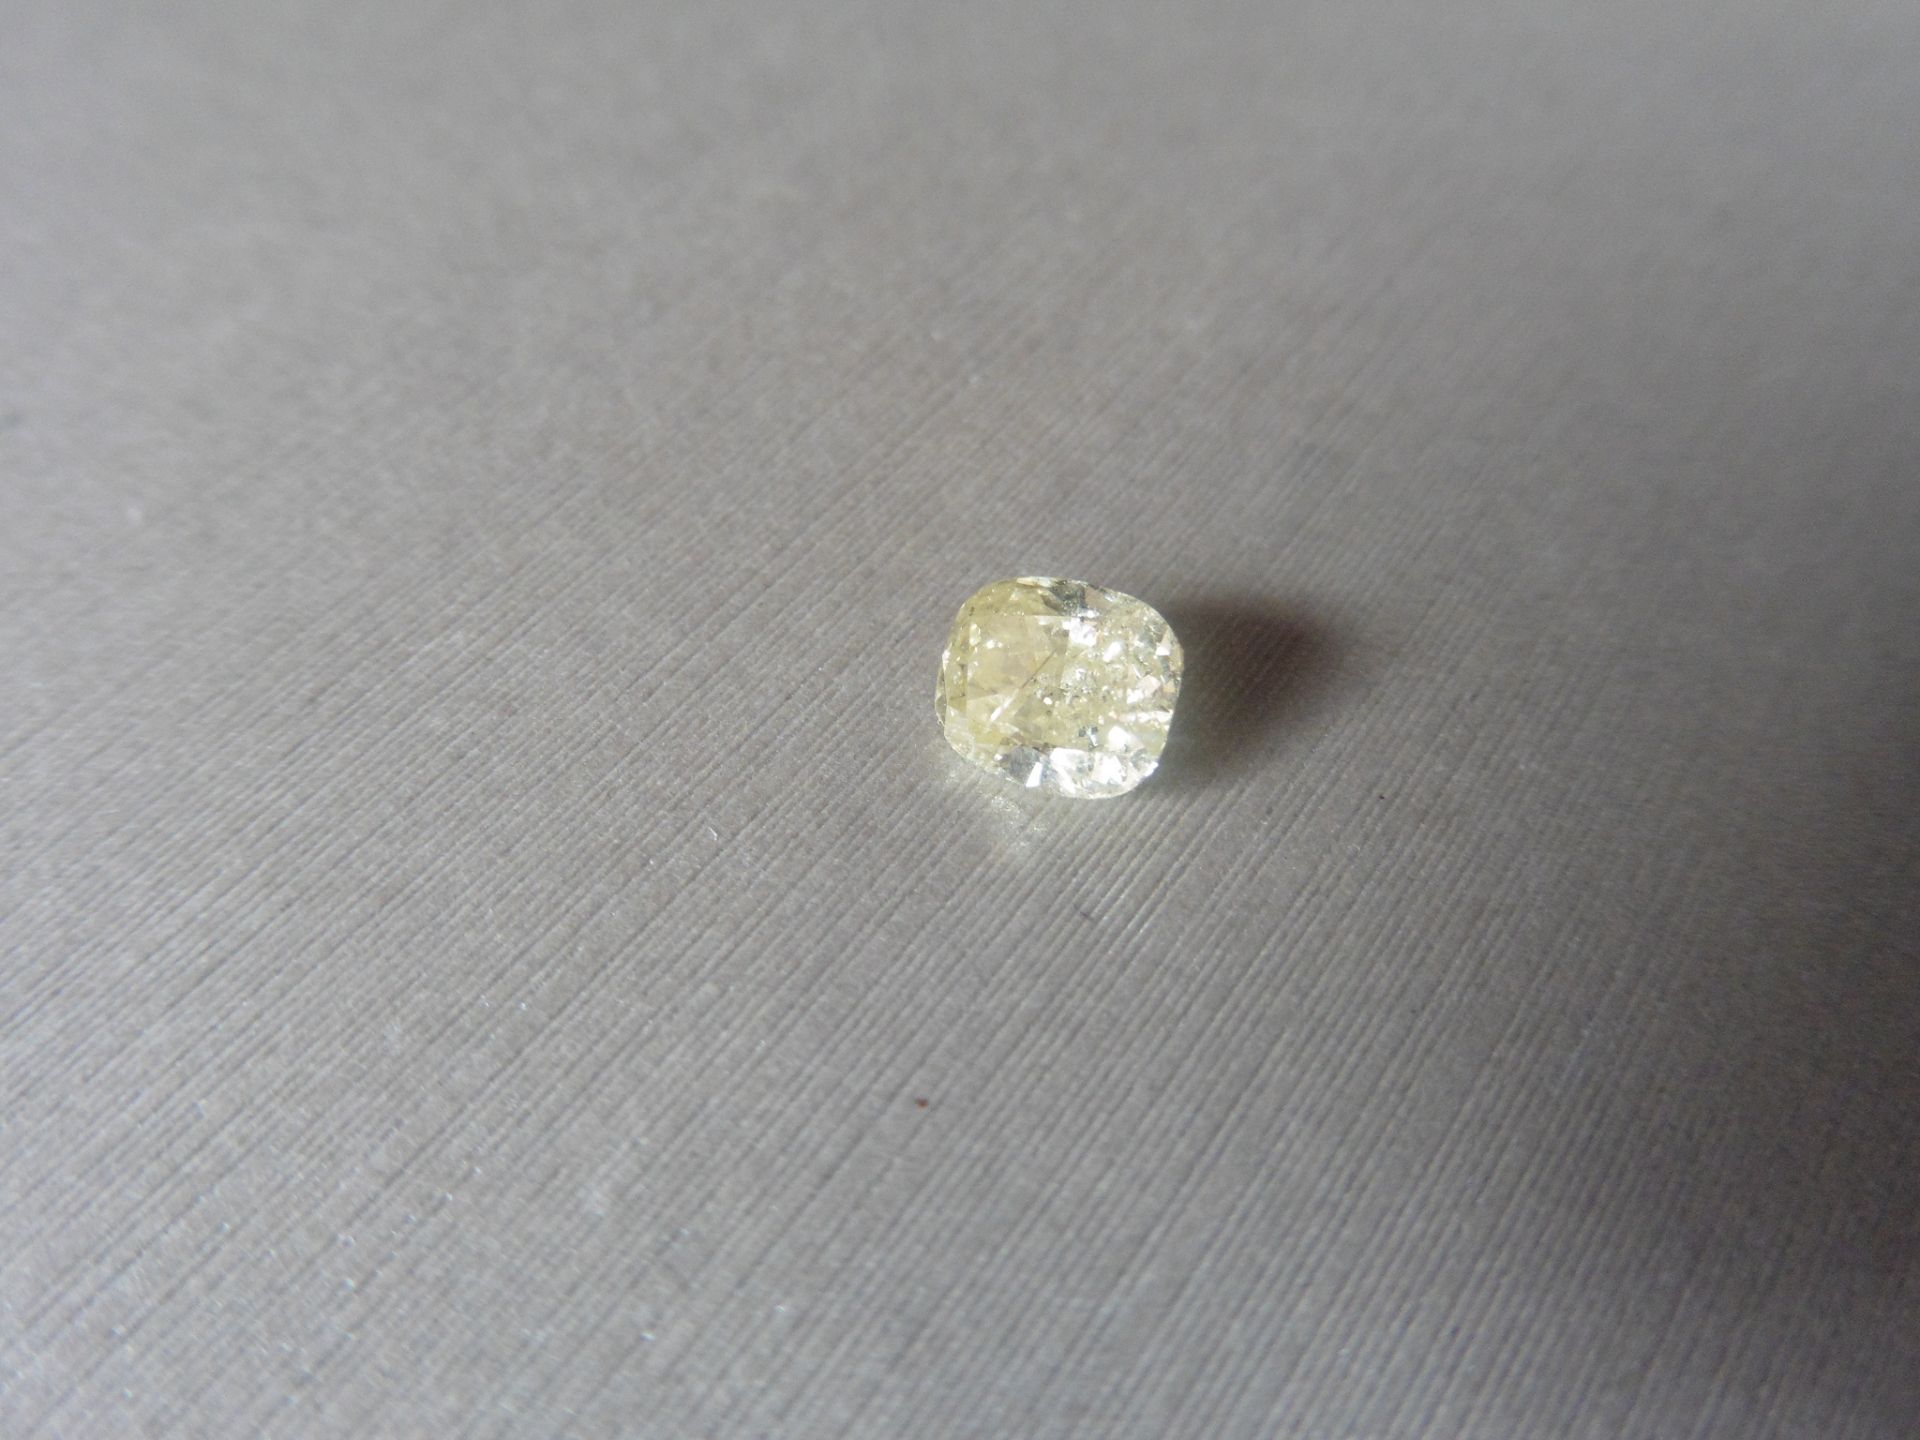 1.57ct loose cushion cut diamond. Fancy yellow colour and I1 clarity. 7.13 x 6.22 x 4.09mm. - Image 4 of 4